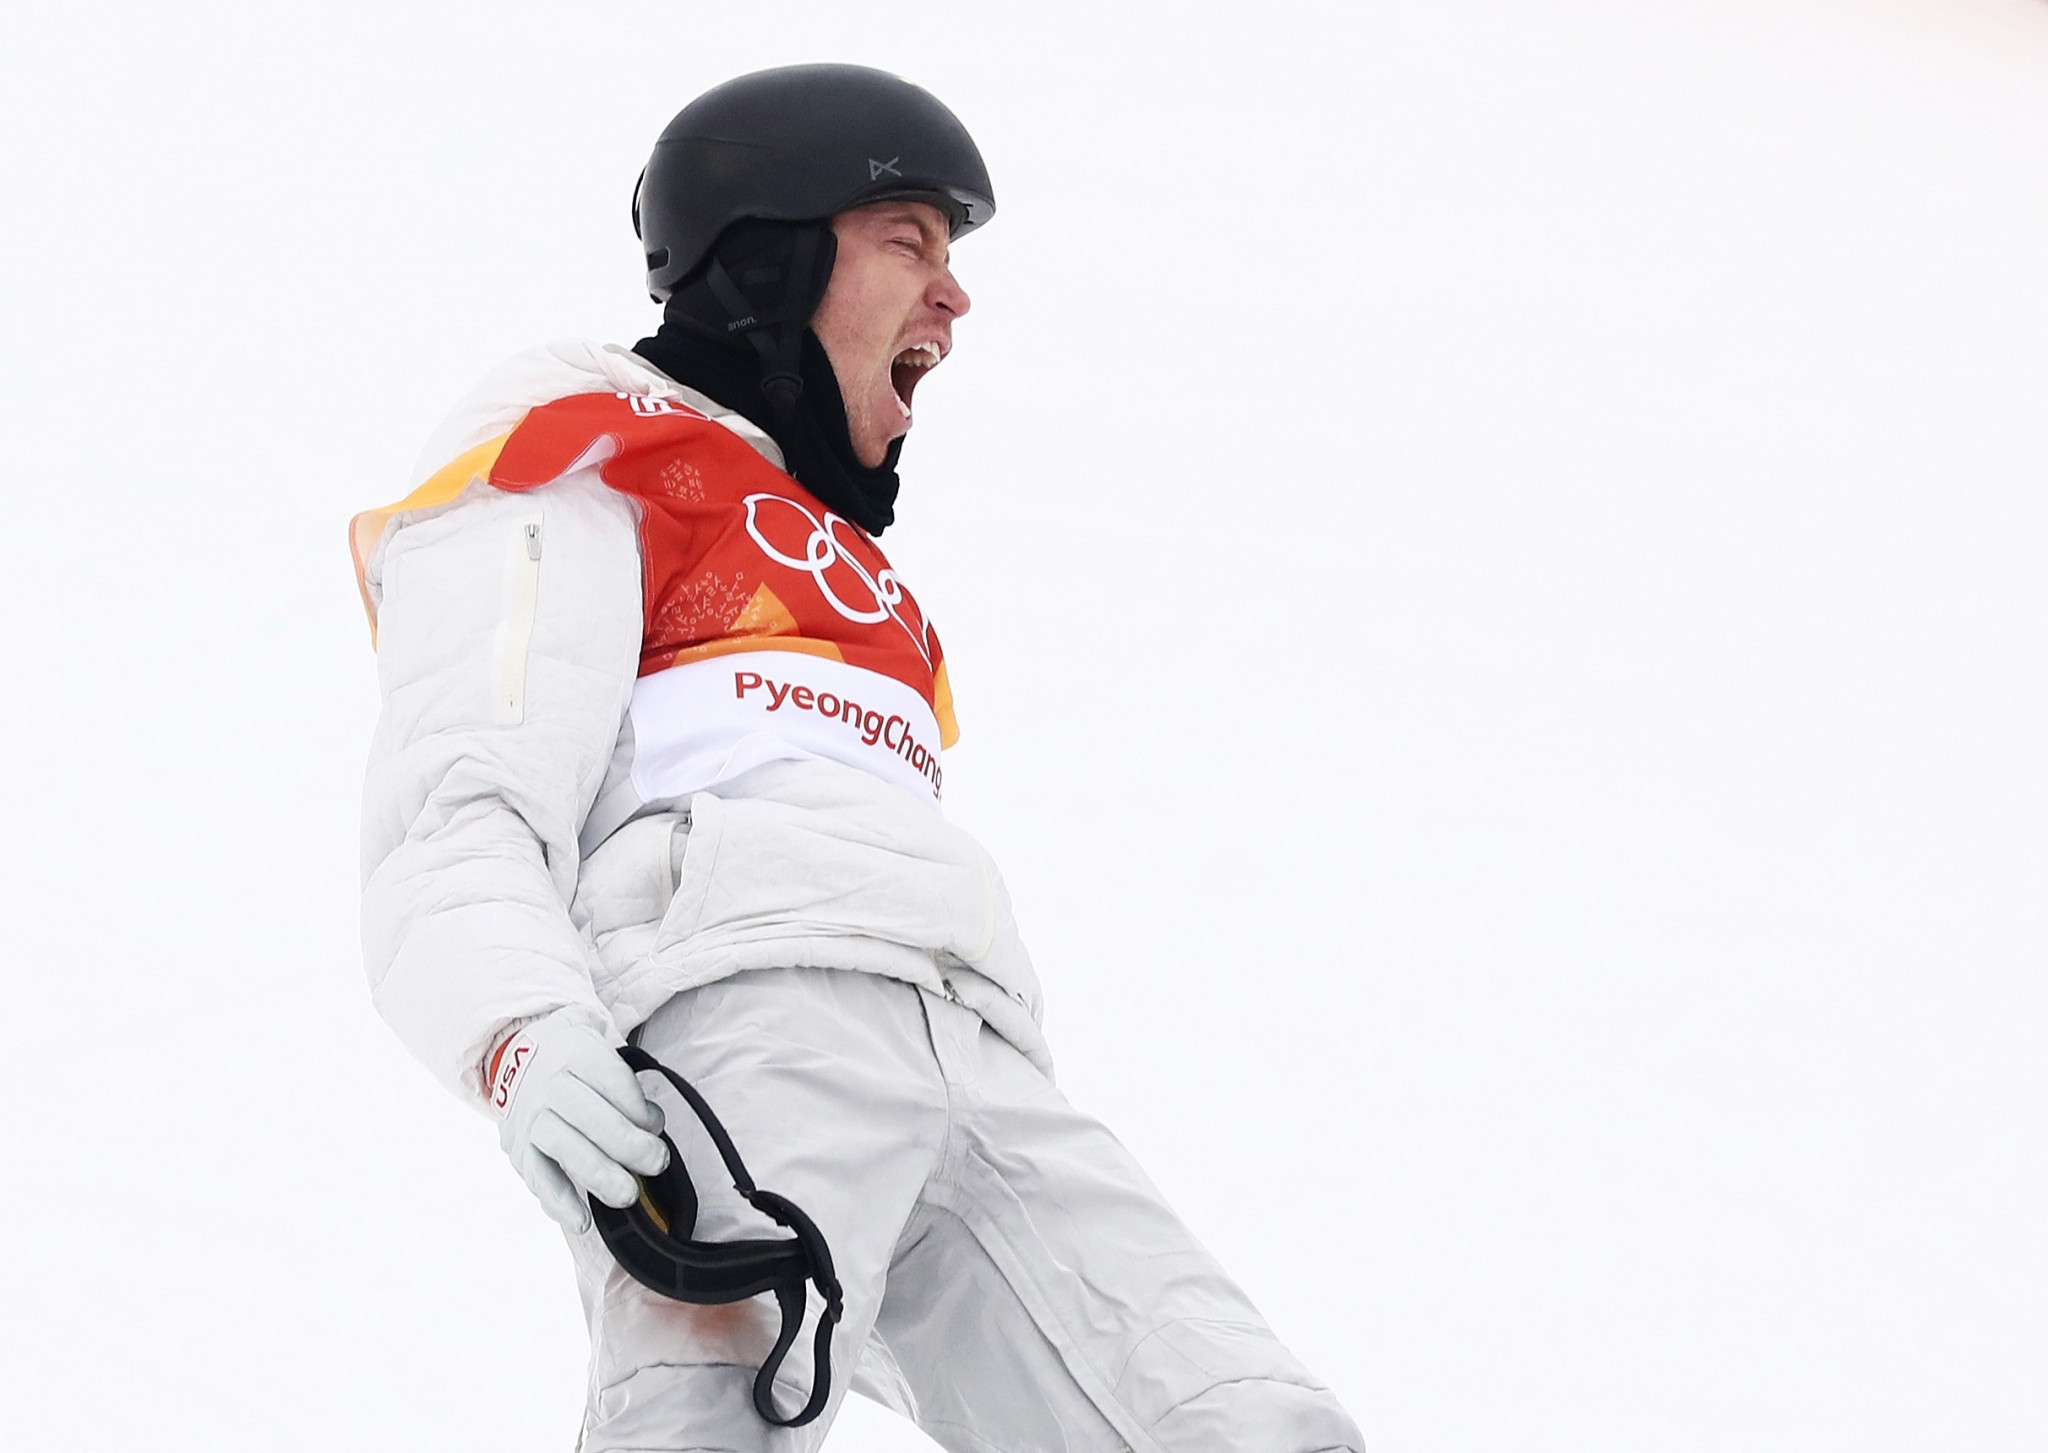 Shaun White is expected to make his final appearance at the Winter Olympics in Beijing ©Getty Images